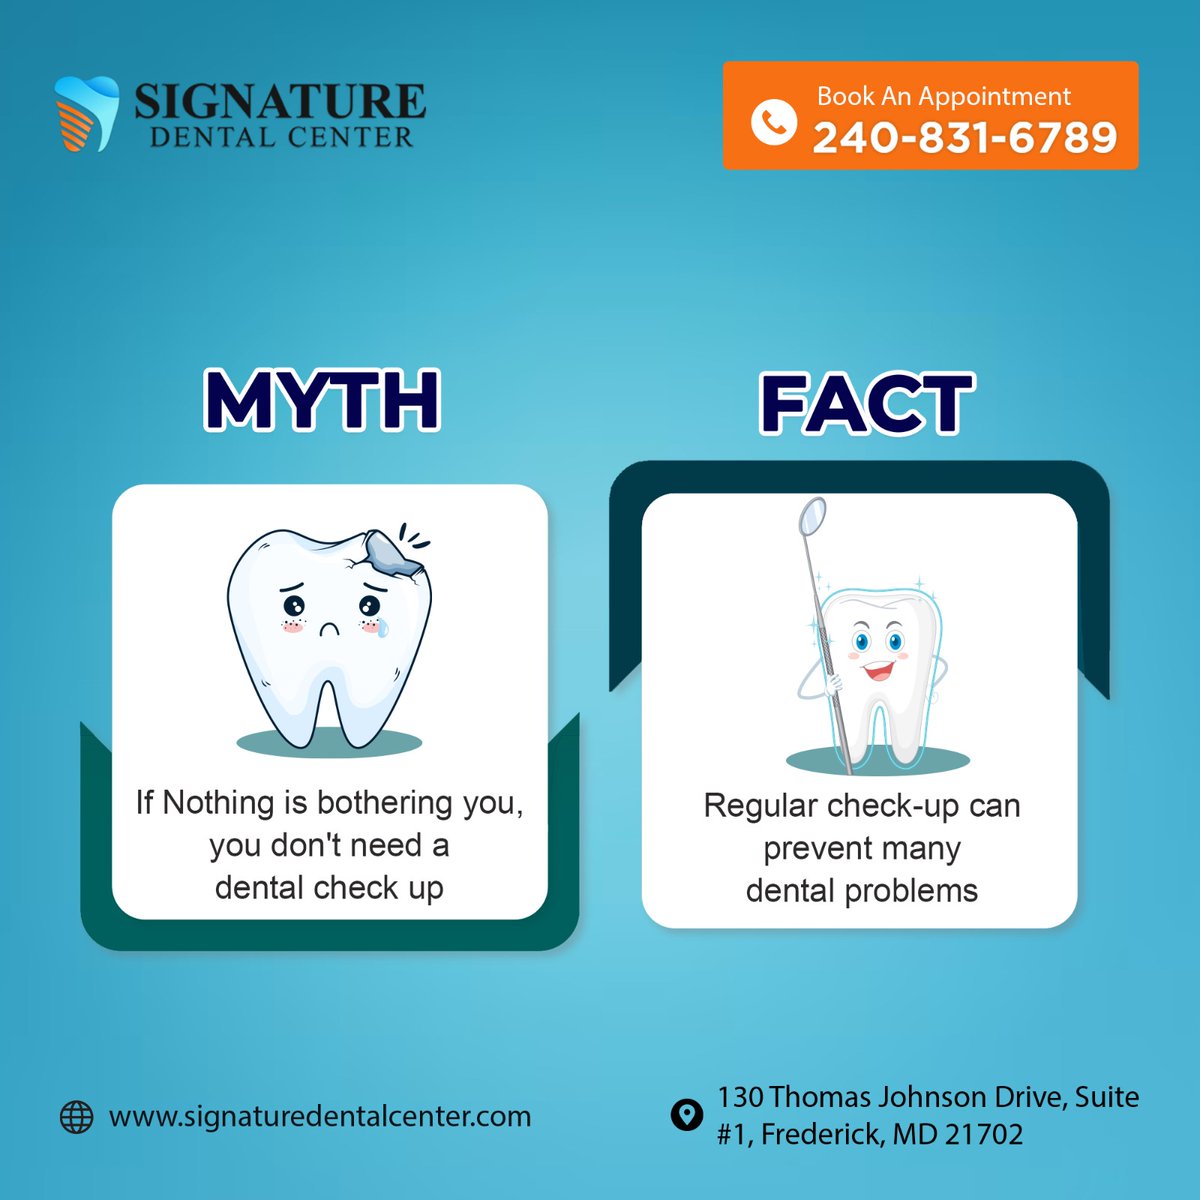 Your smile deserves the best care! Regular dental check-ups are key to maintaining healthy teeth and gums. Schedule your appointment today
.
For appointments, call or text: +1240-831-6789
Or Visit: signaturedentalcenter.com
.
#Dentalcheckups #Pediatricdentistry #toothextraction